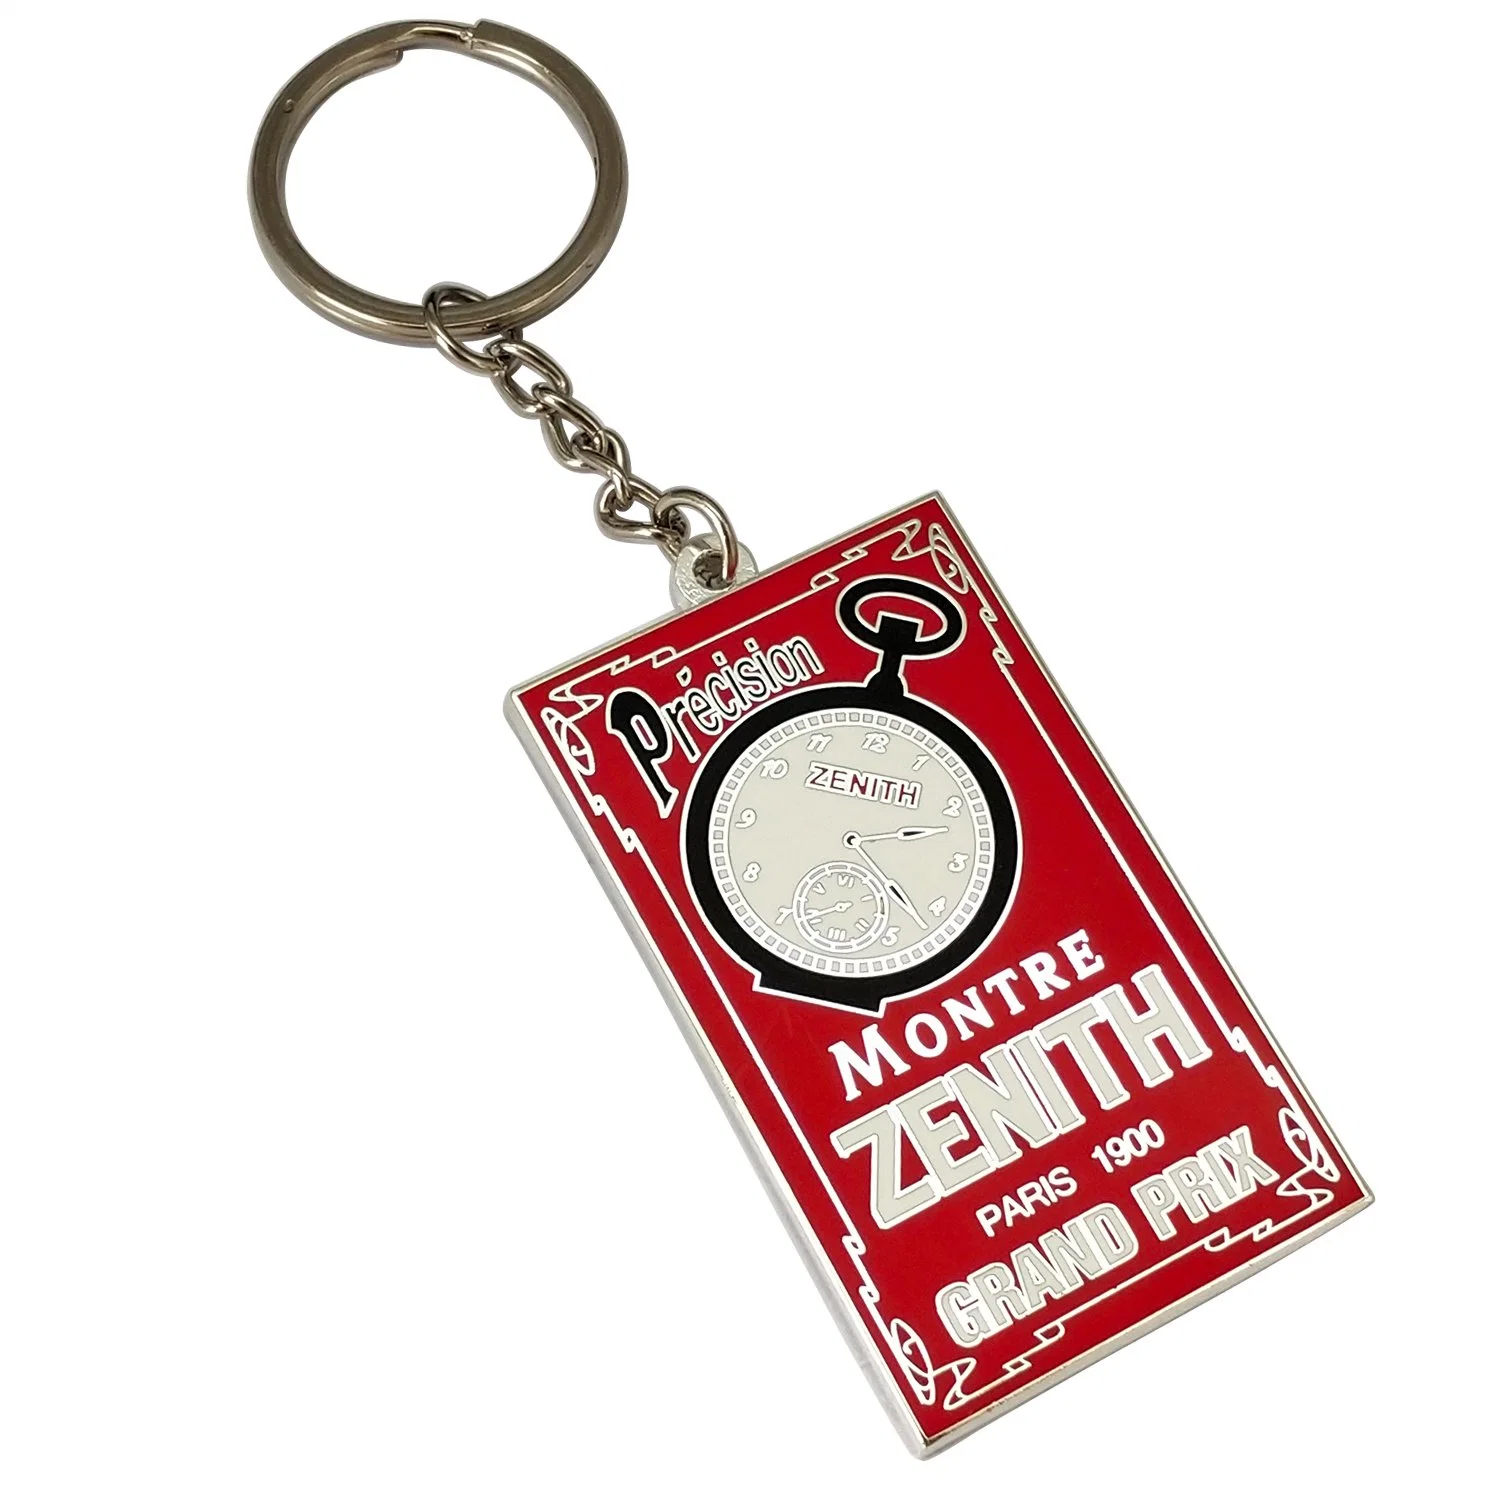 Wholesale/Supplier Custom Enamel Crafts Promotional Gift Name Tag Company Activity Souvenir Keyfob Holder Fancy Metal Scenery Clock Key Chains with Design